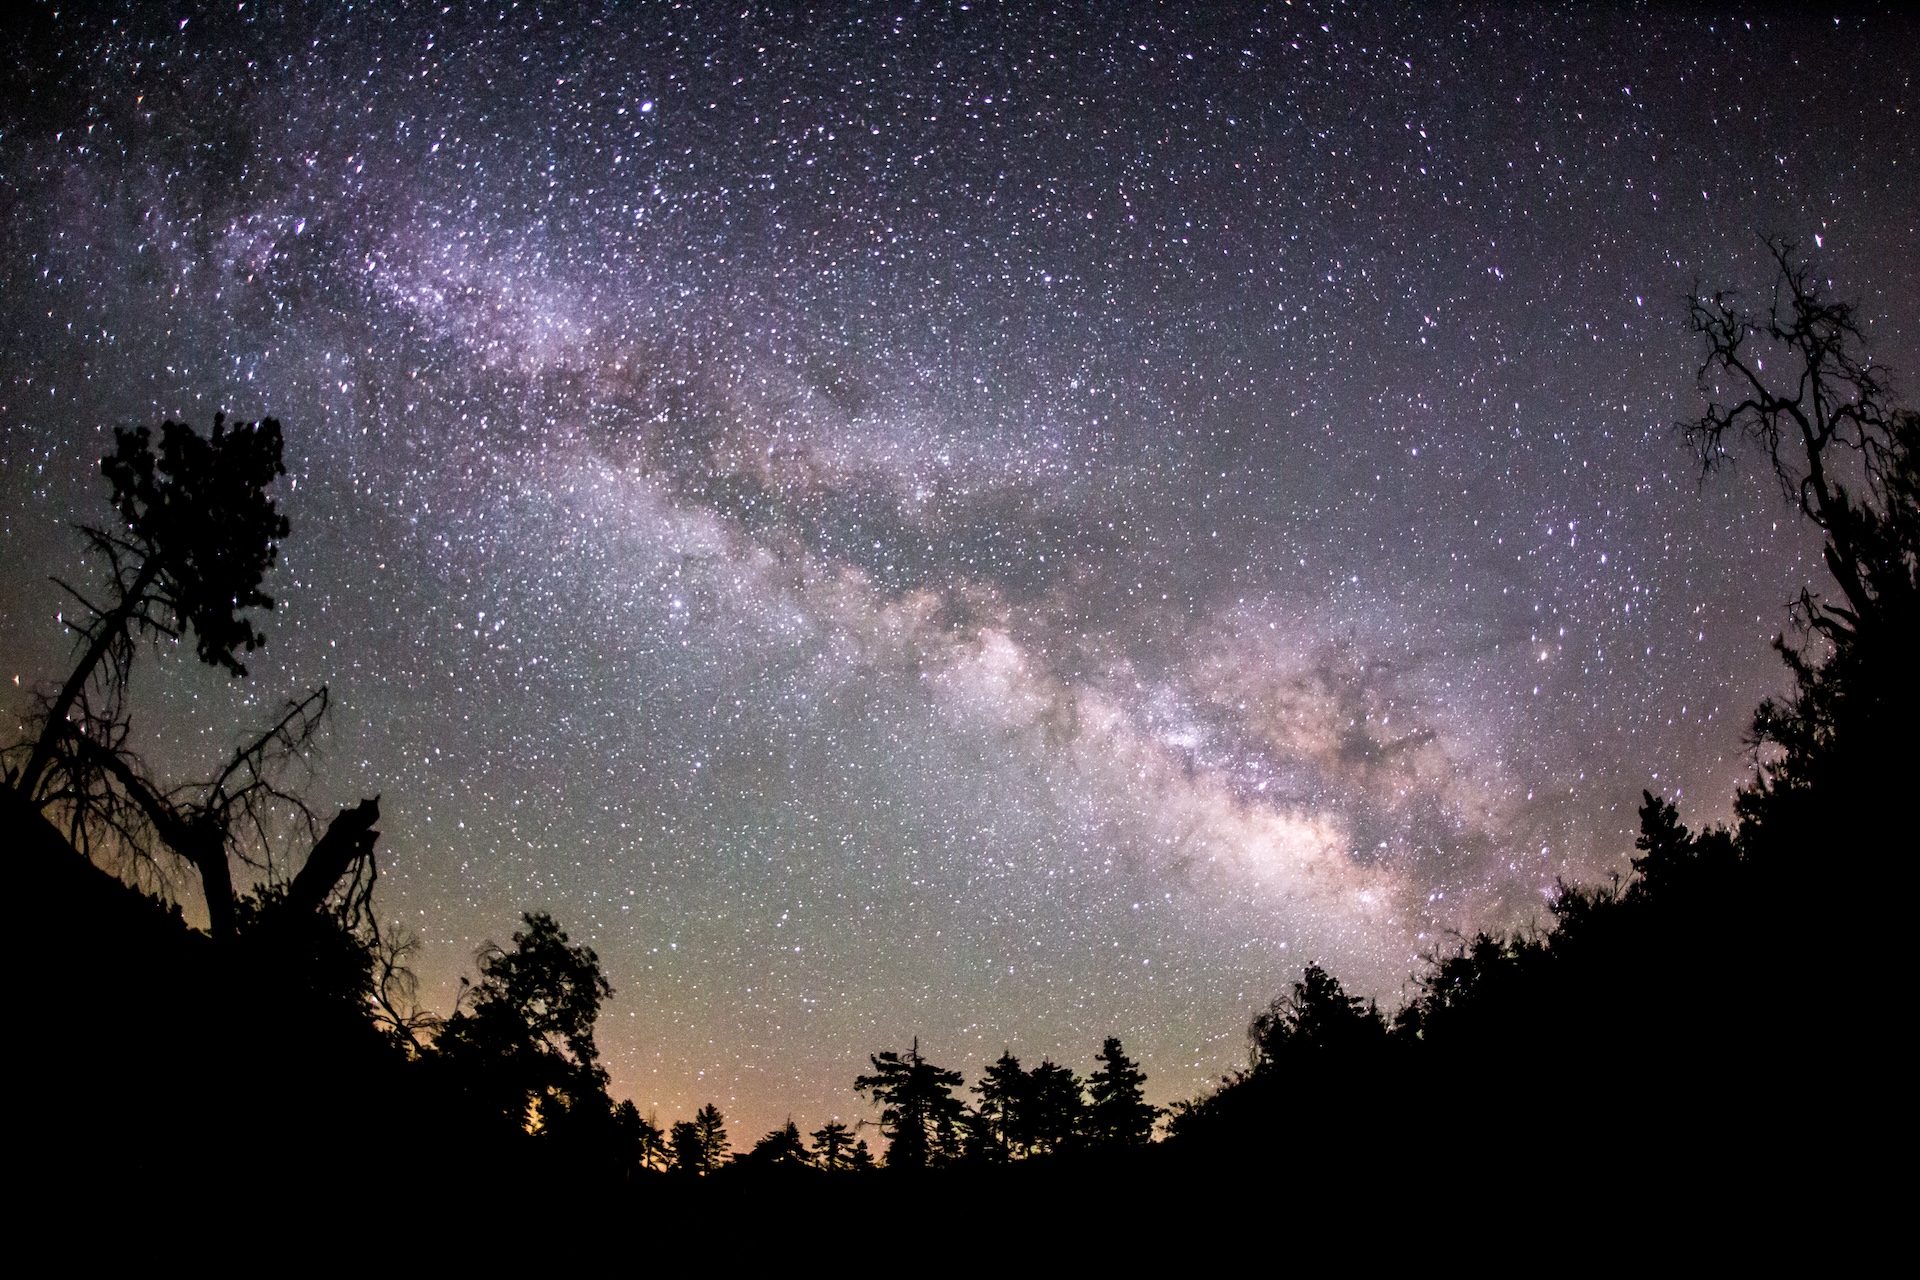 The Milky Way and some trees in the mountains of San Diego County